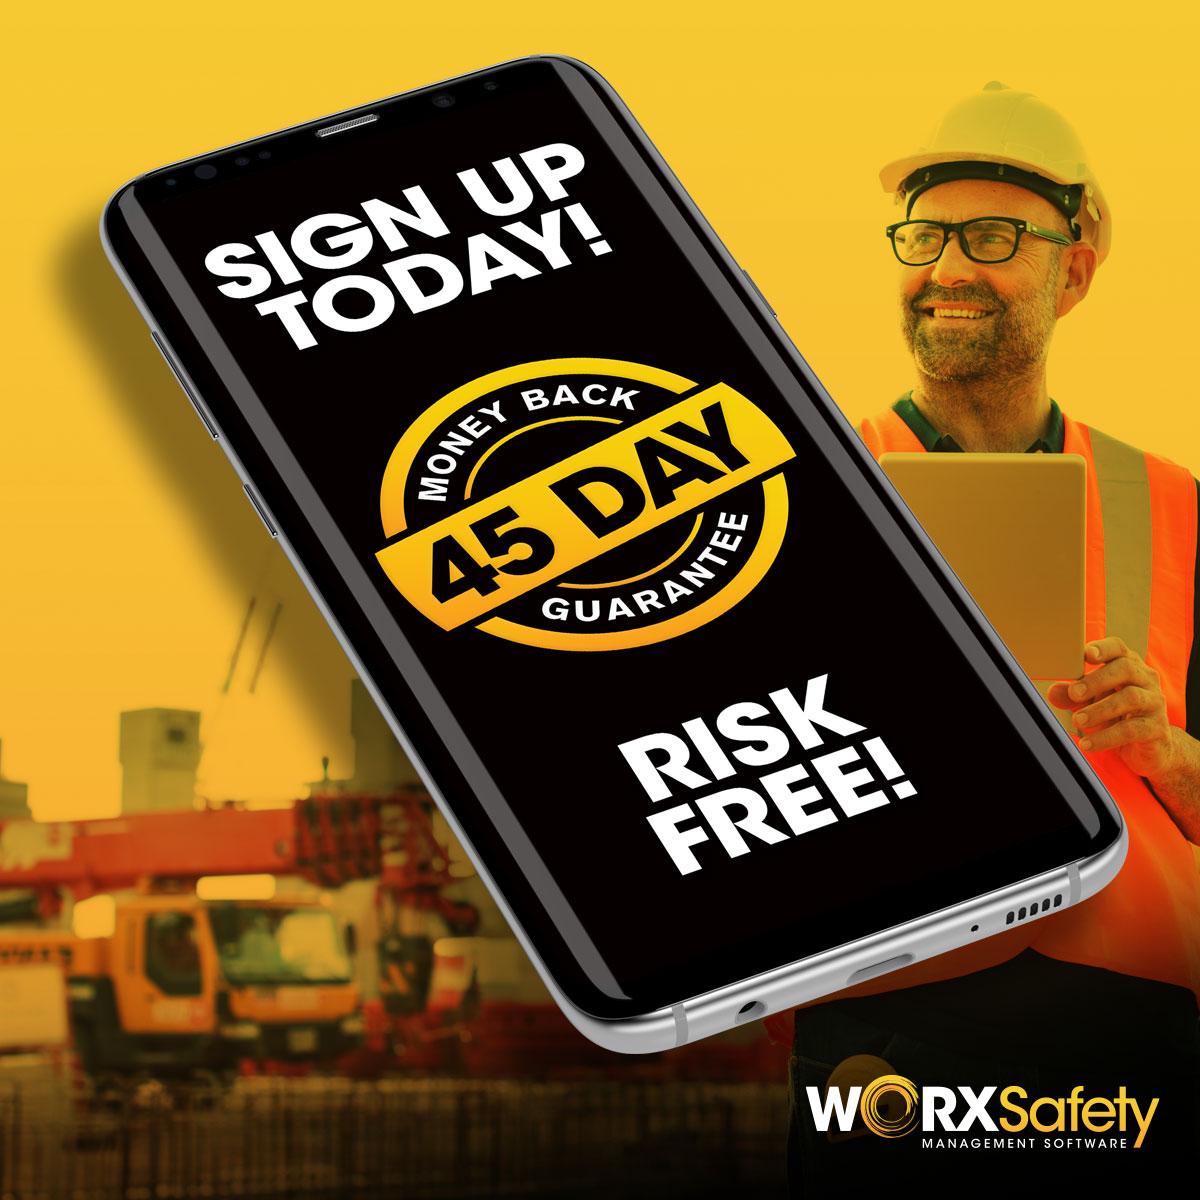 Try Worx Safety Today with Zero Risk: Our 45 Day Money Back Guarantee Has You Covered